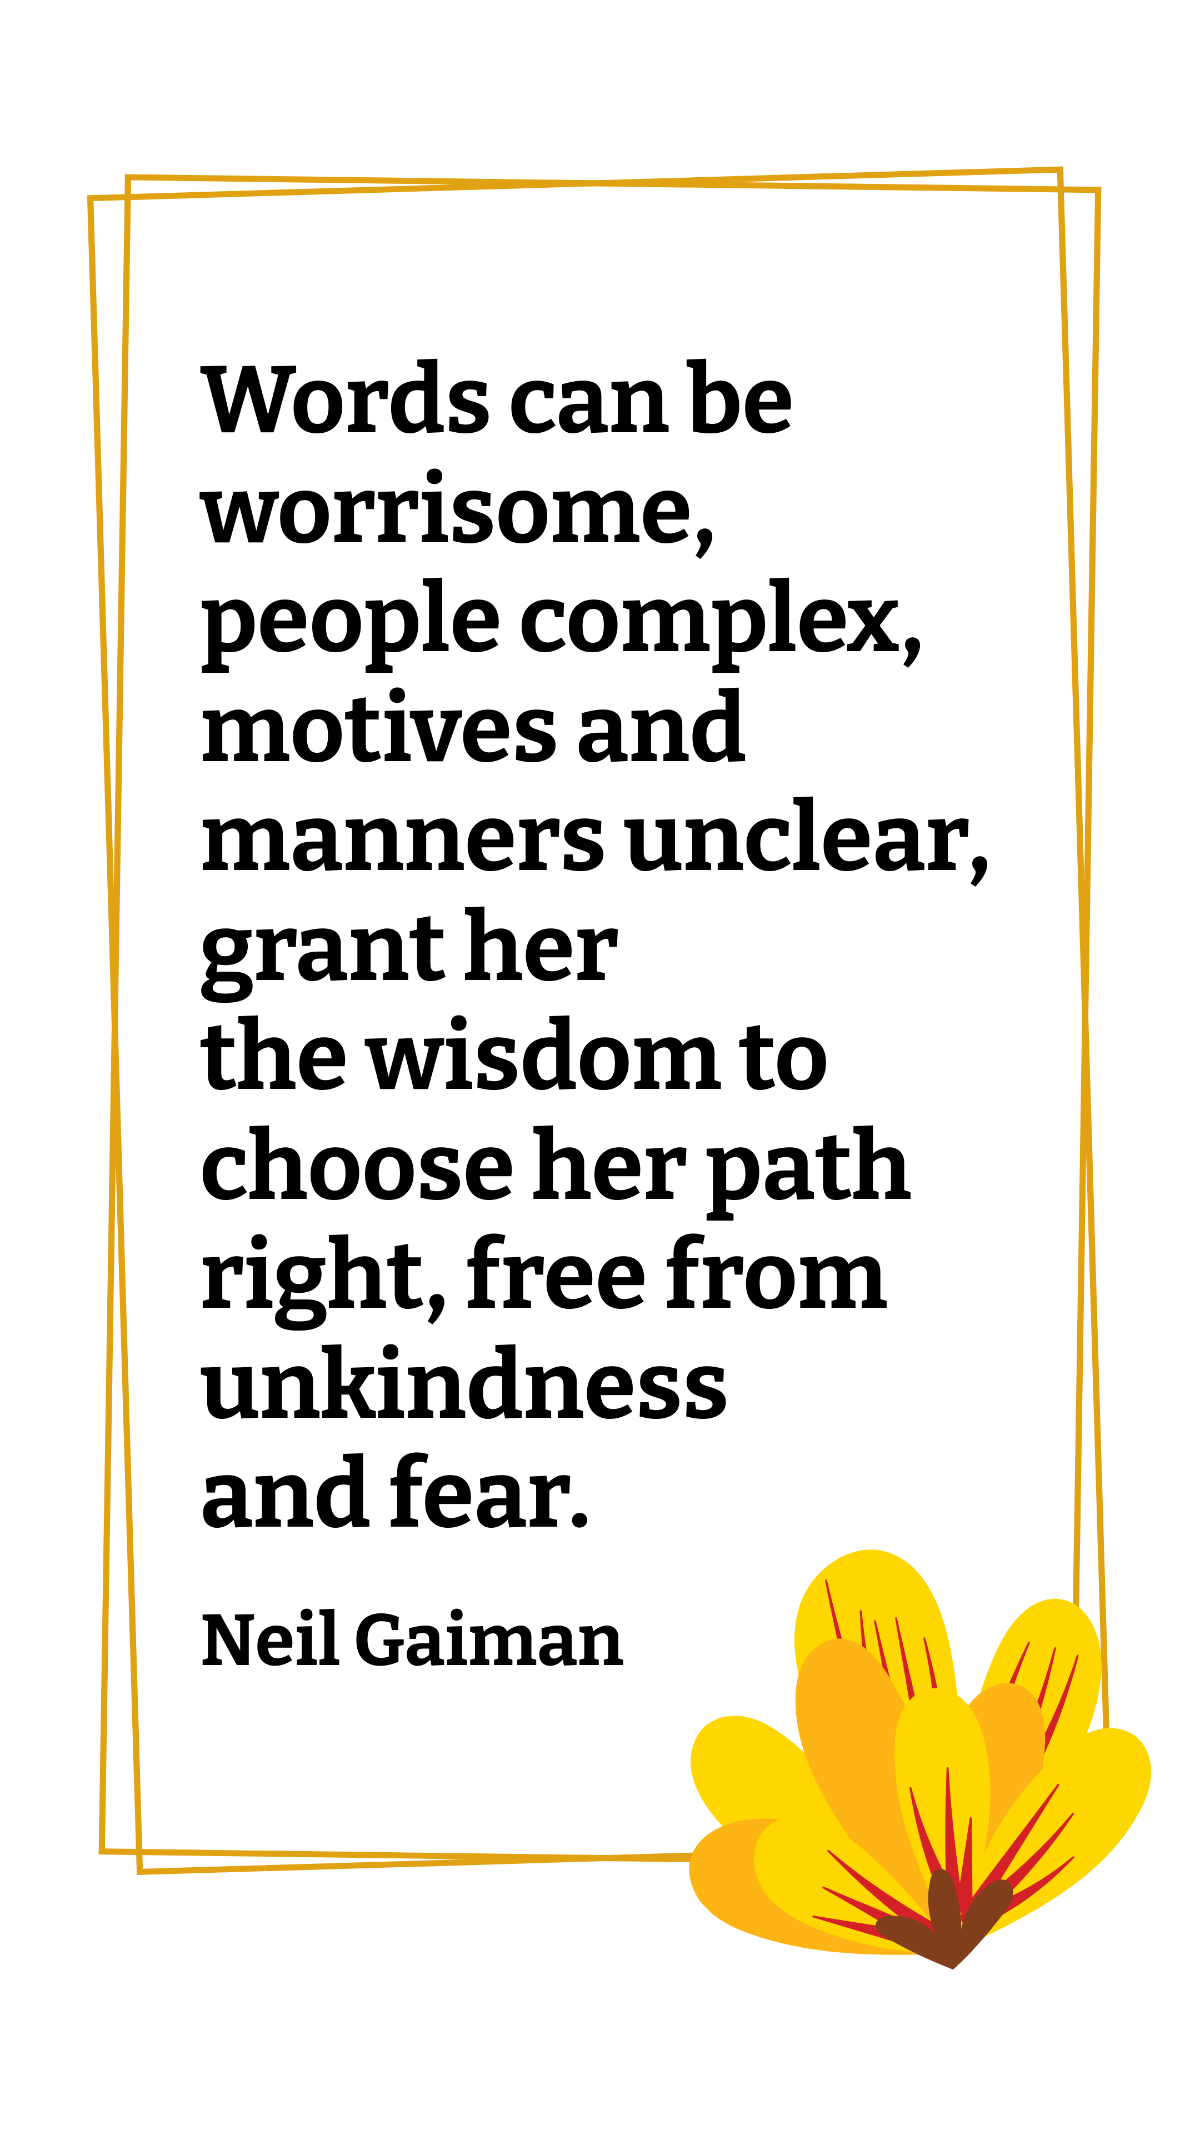 Free Neil Gaiman - Words can be worrisome, people complex, motives and manners unclear, grant her the wisdom to choose her path right, from unkindness and fear. Template